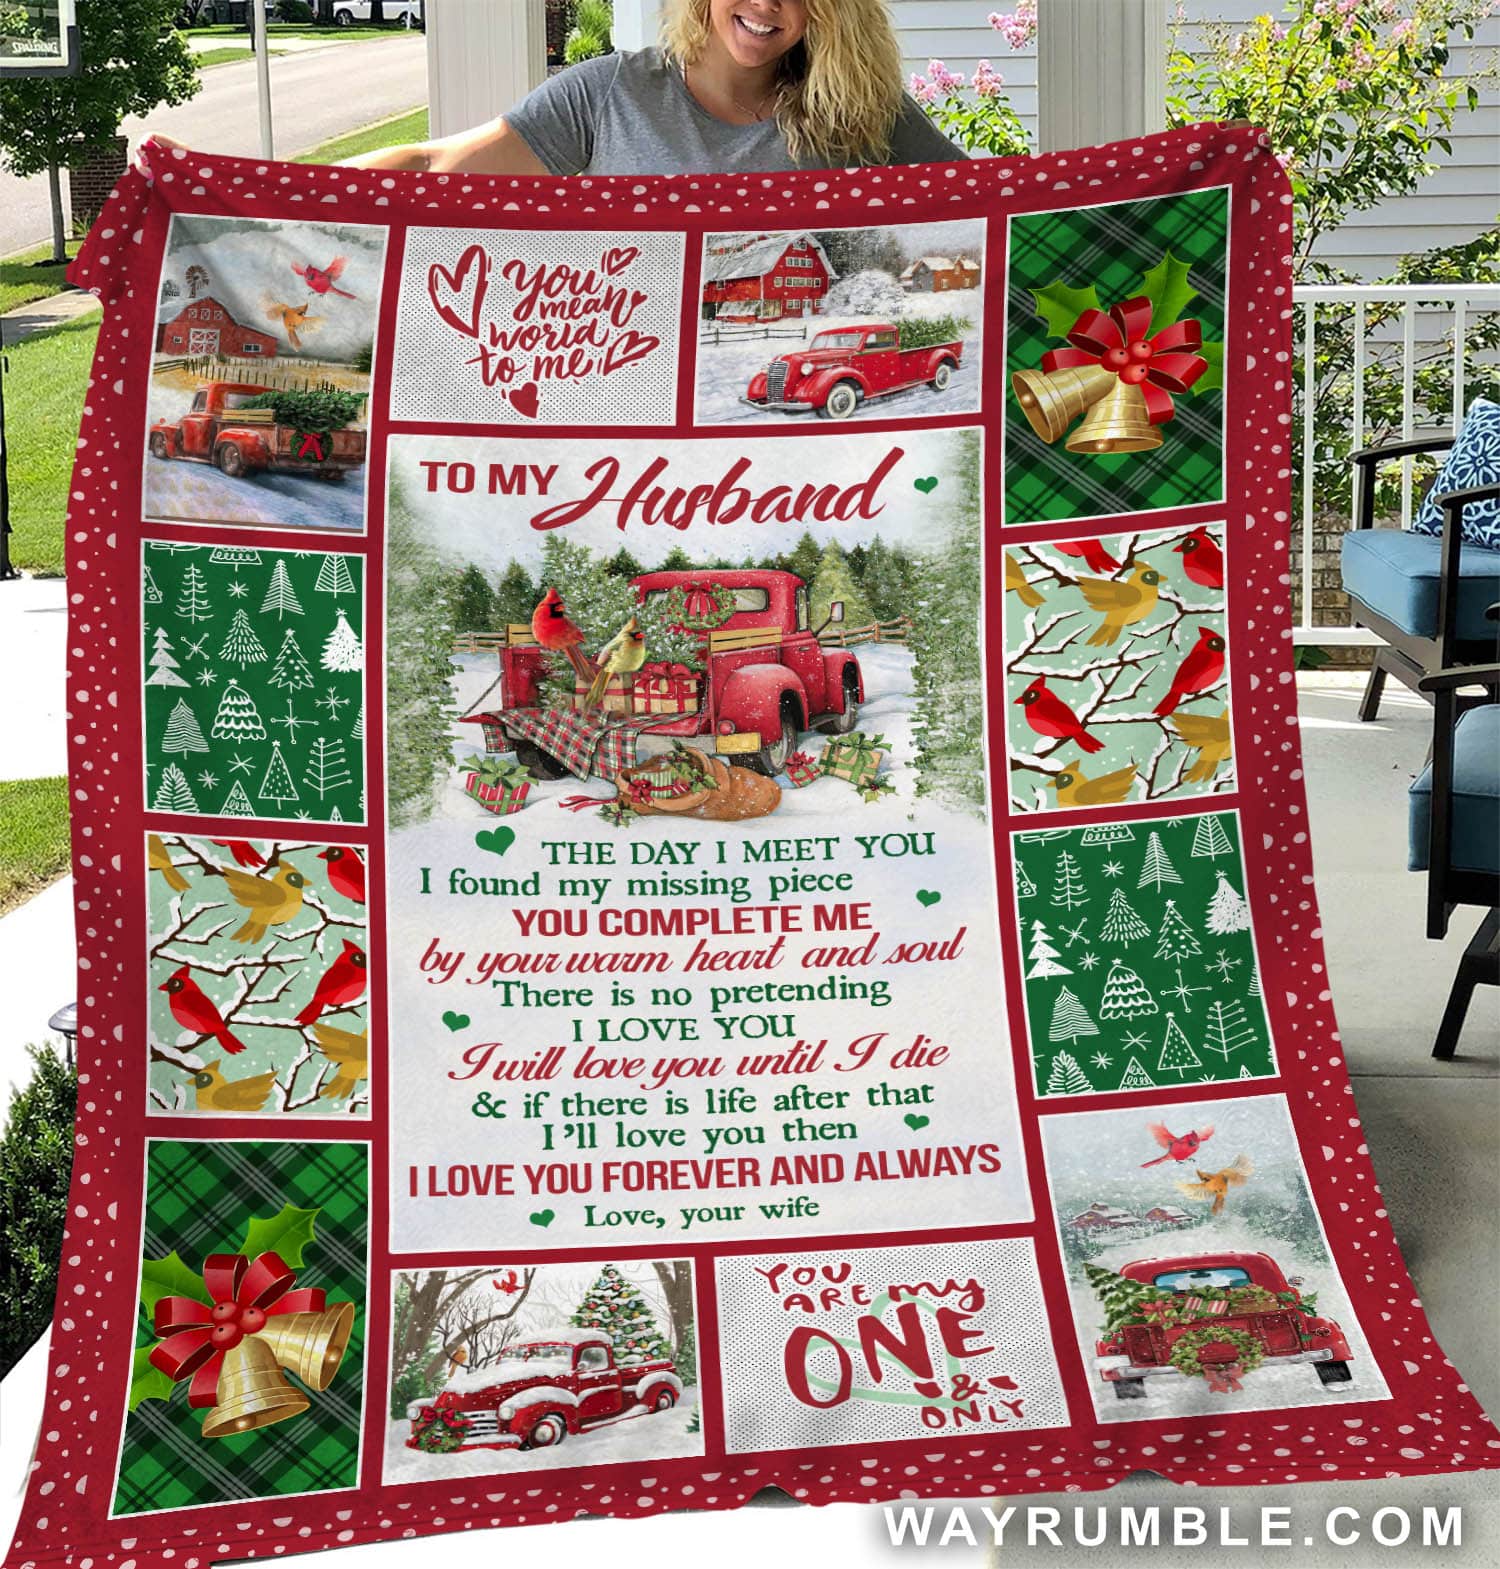 To My Husband, Cardinal, Red Truck, The Day I Meet You, I Found My Missing Piece – Christmas, Couple Blanket